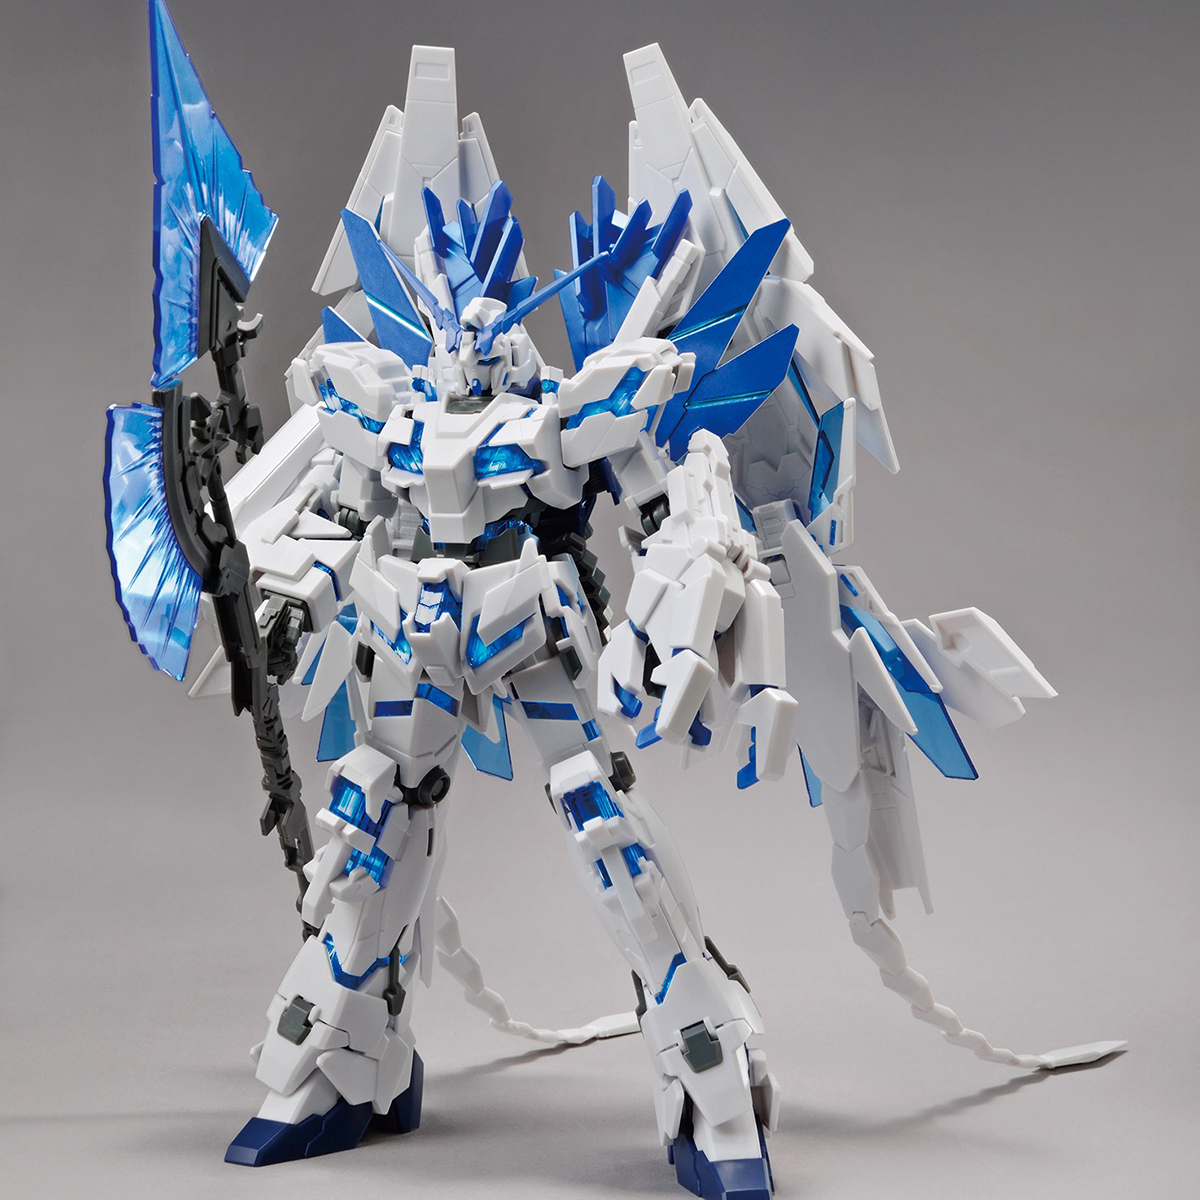 ARMOR (limited)